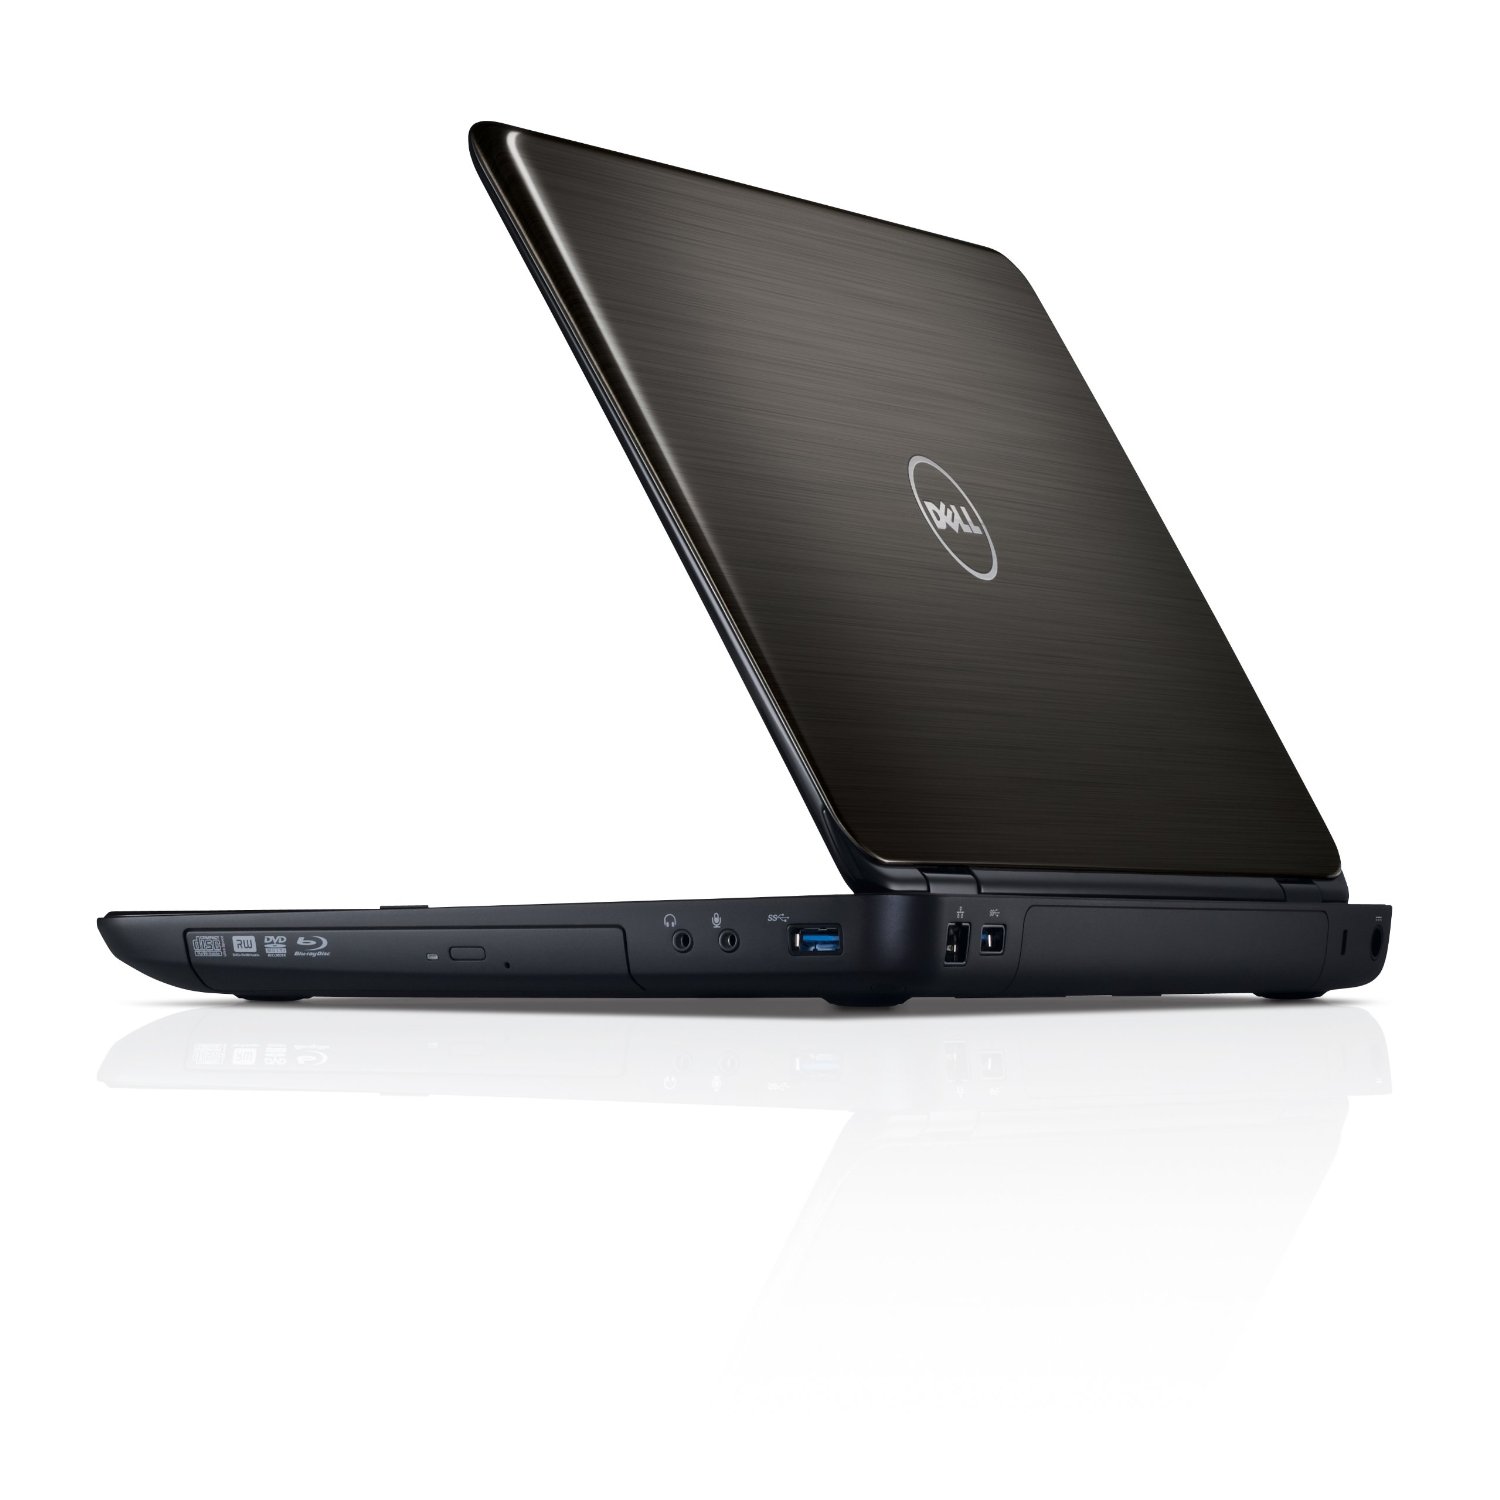 http://thetechjournal.com/wp-content/uploads/images/1111/1320857776-dell-inspiron-i14rn1364dbk-14inch-laptop-6.jpg